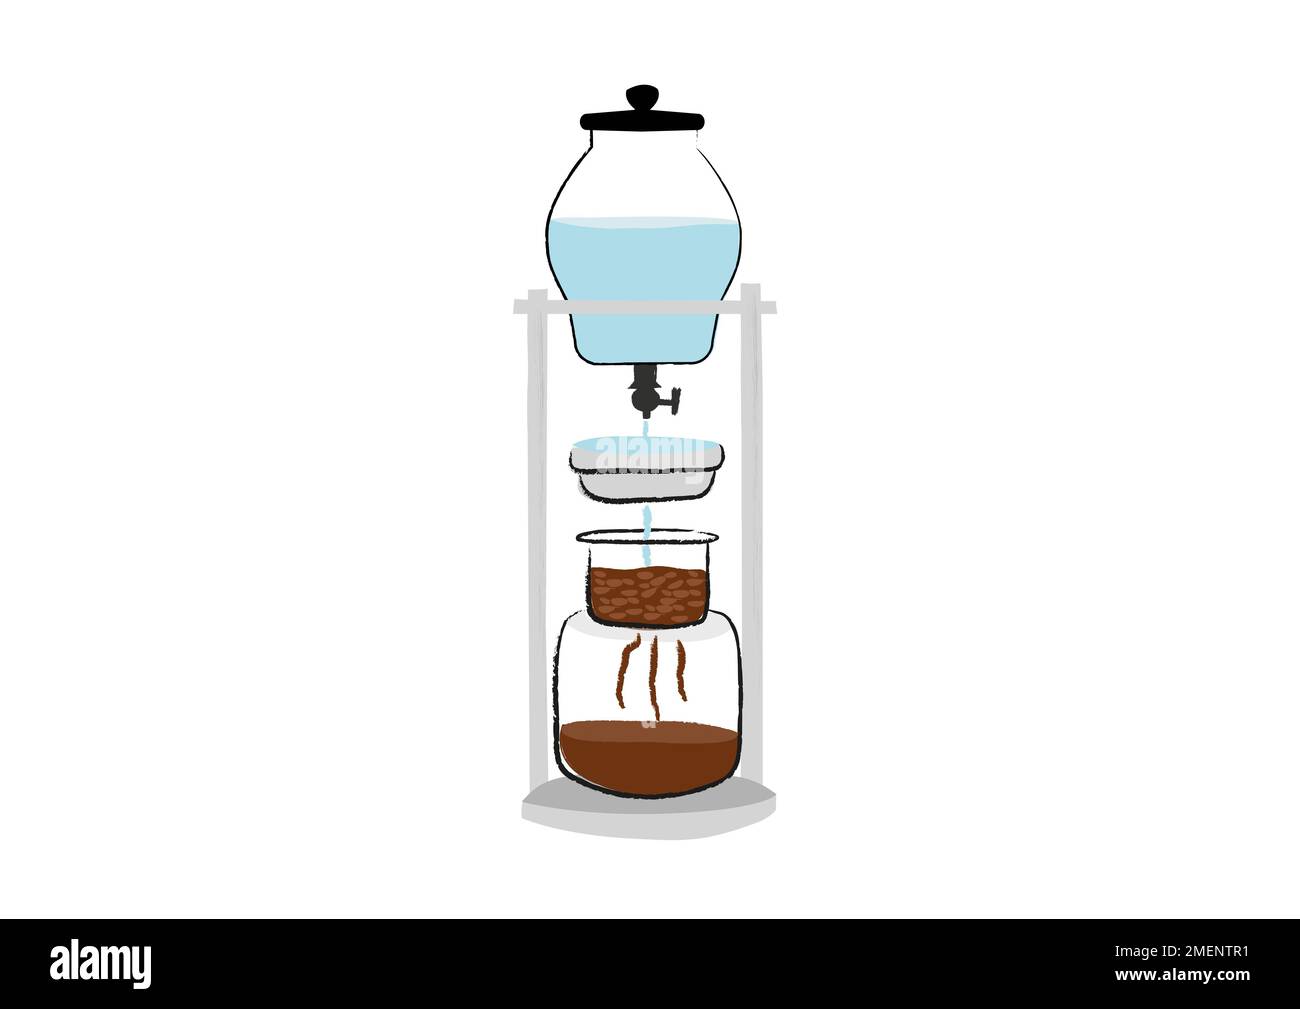 Illustration of cold dripper coffee maker Stock Photo